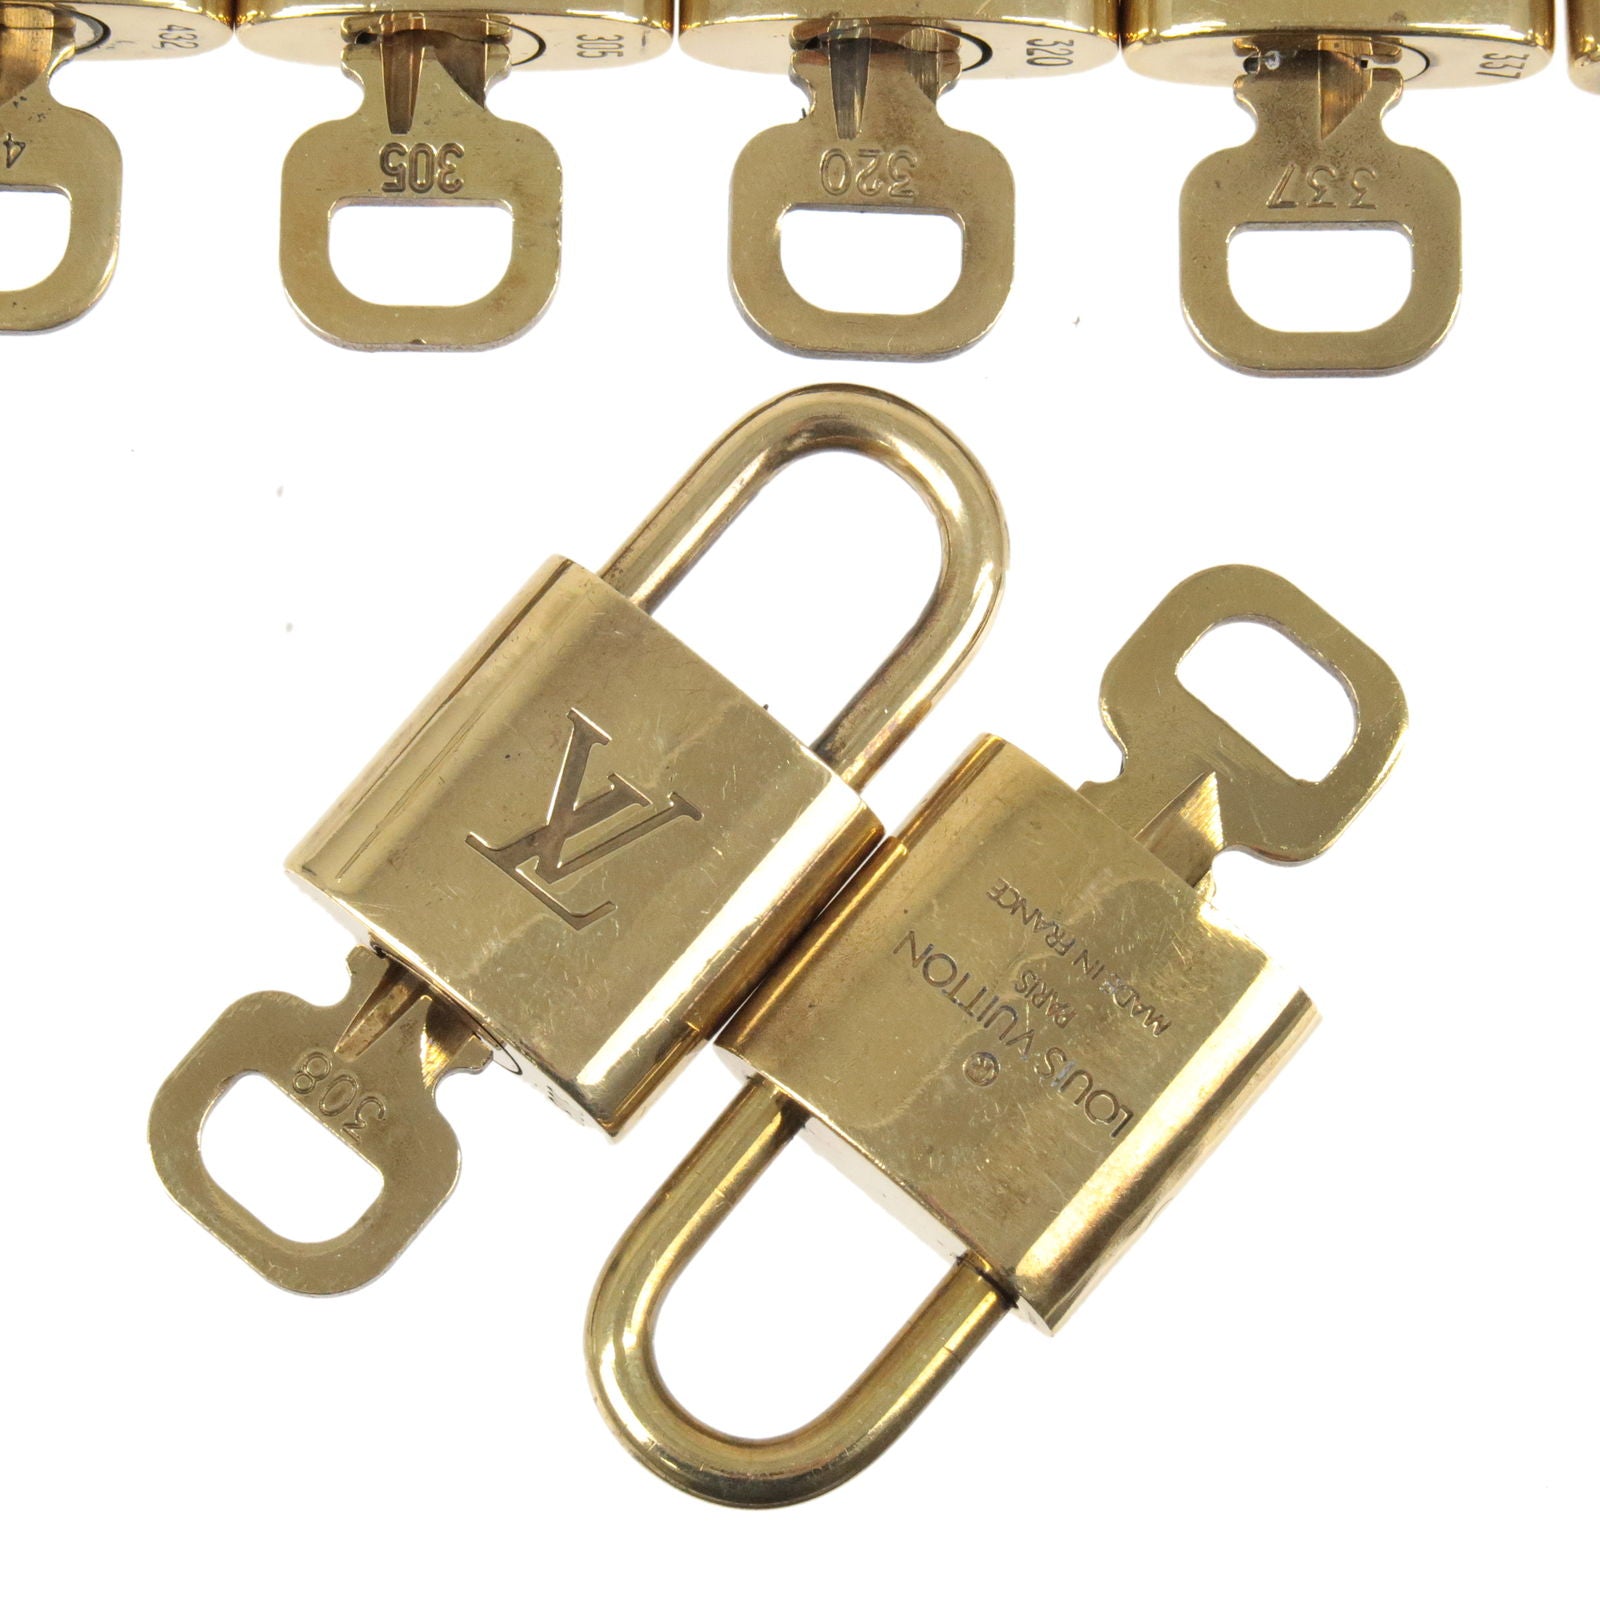 Authentic LOUIS VUITTON Lock And Key Set Padlock Made In France,45$/Each Set